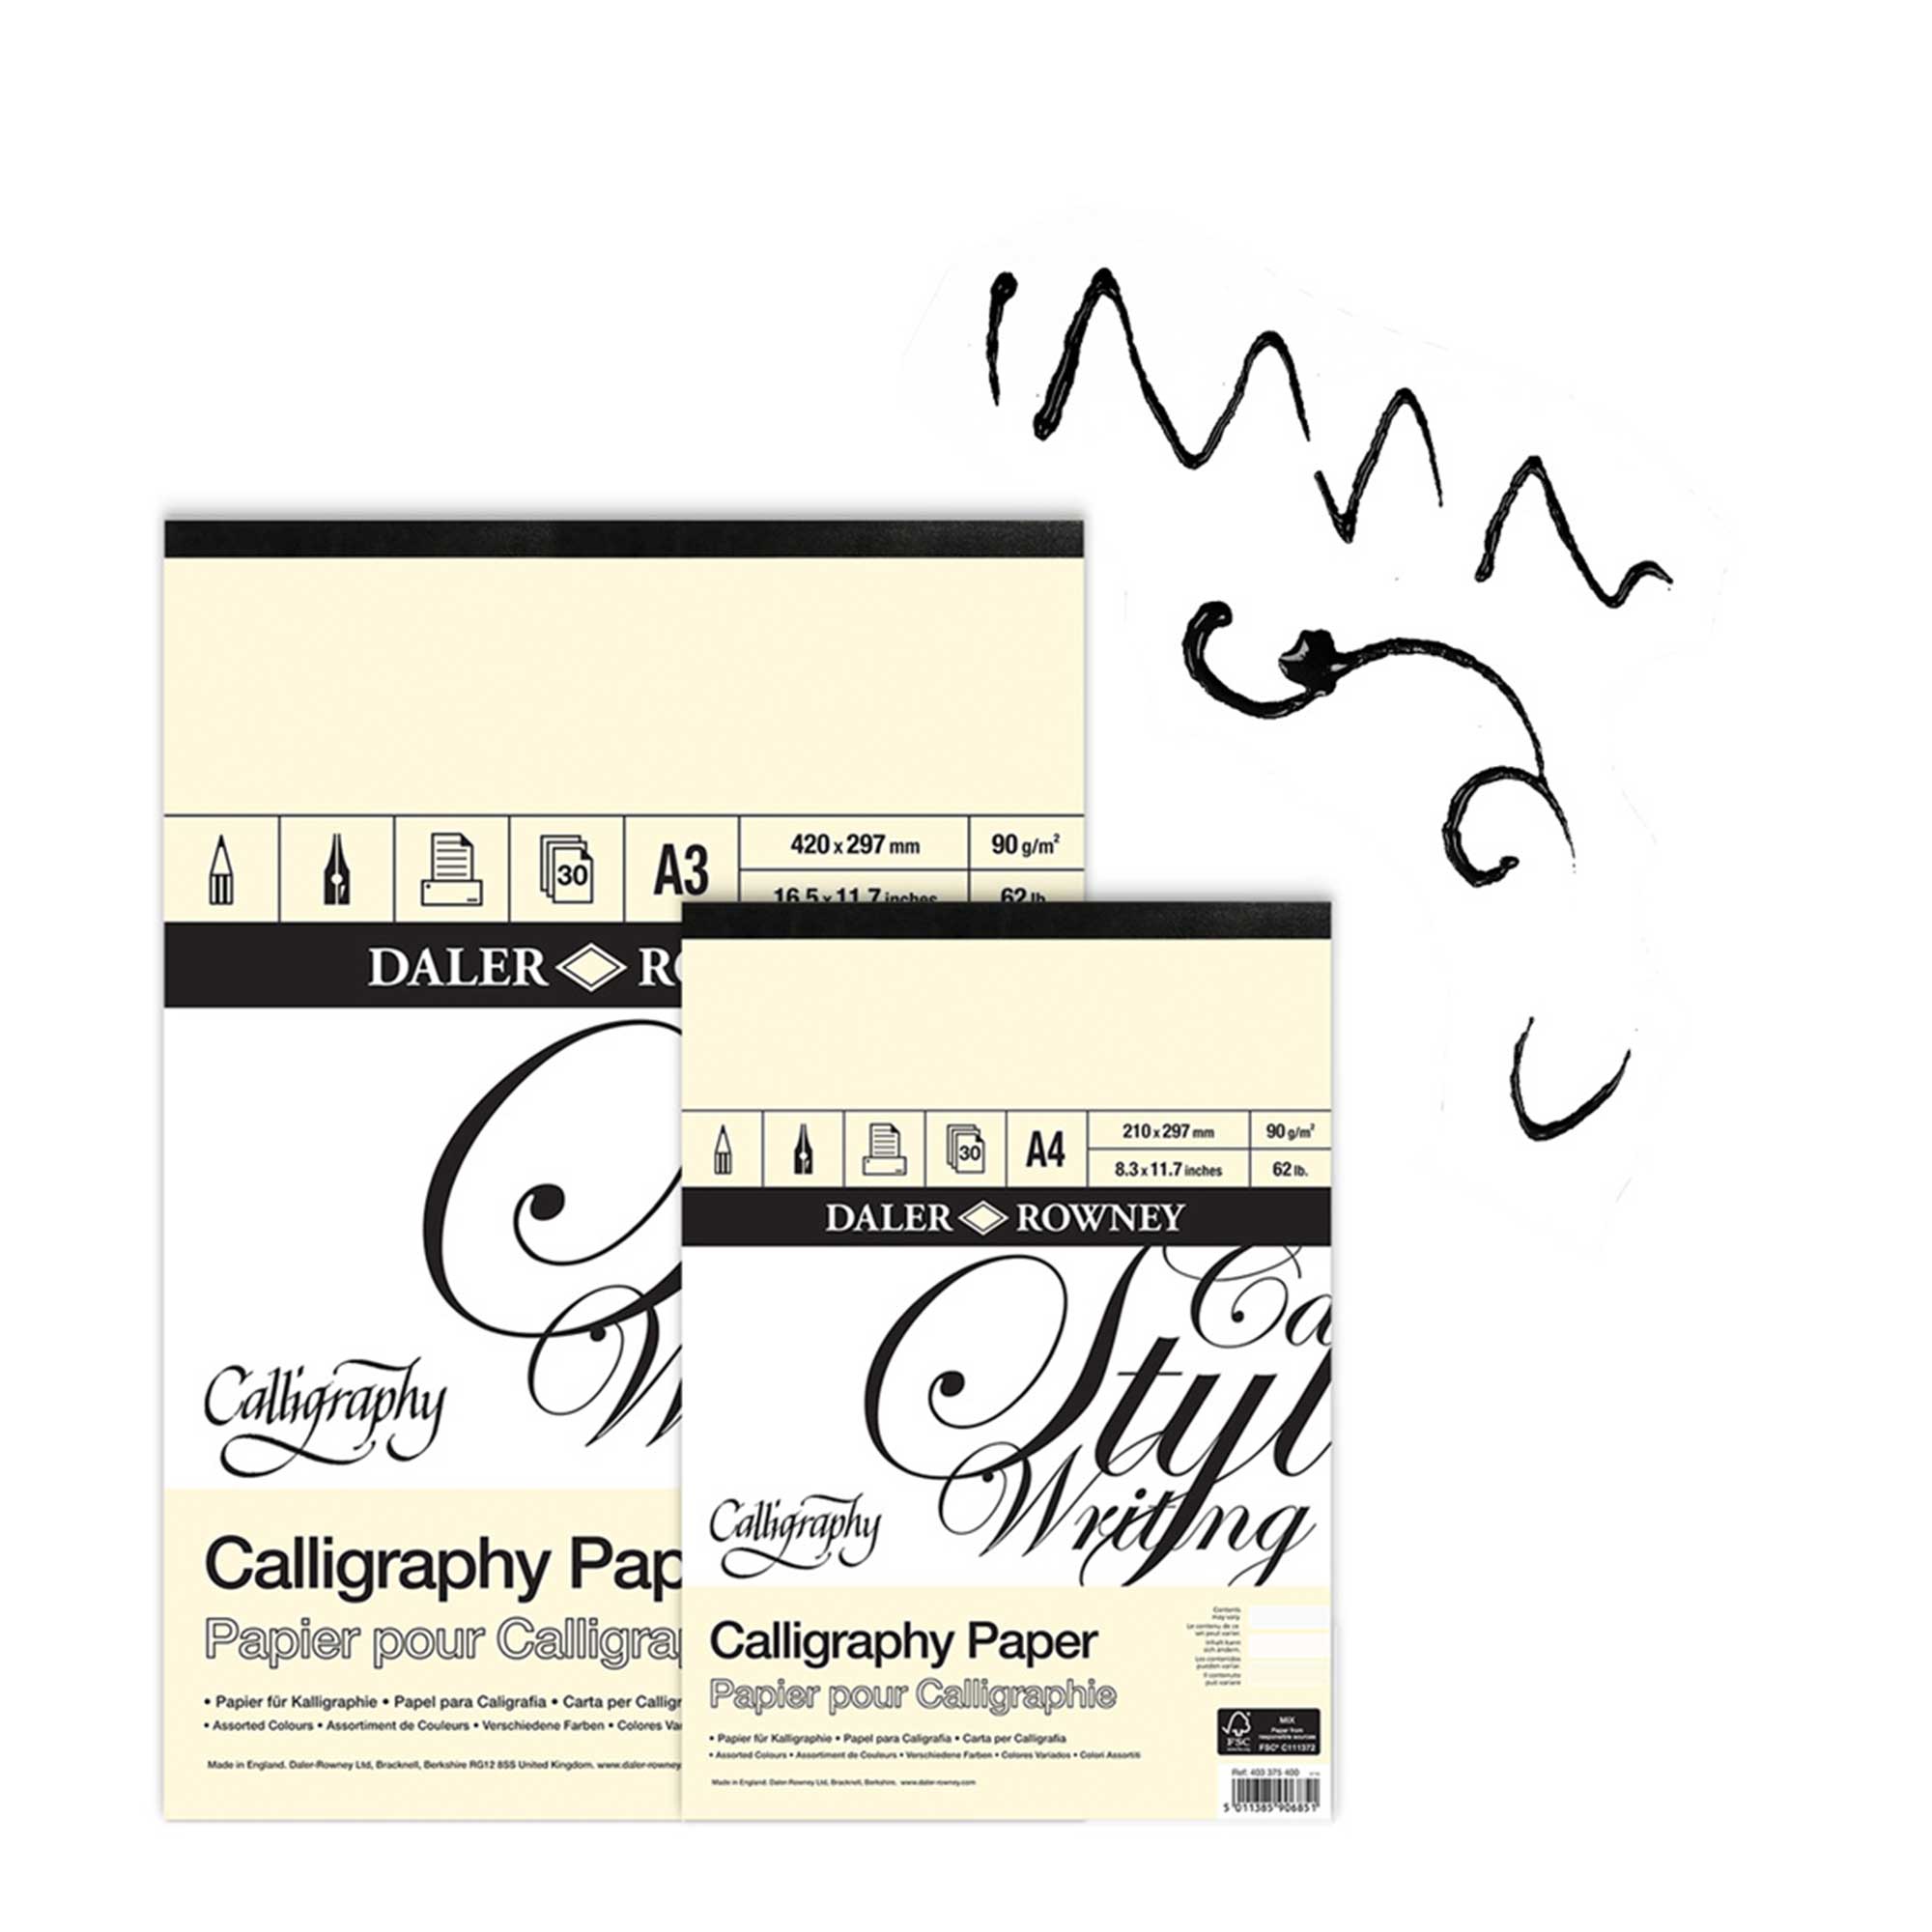 Daler-Rowney Calligraphy Pads